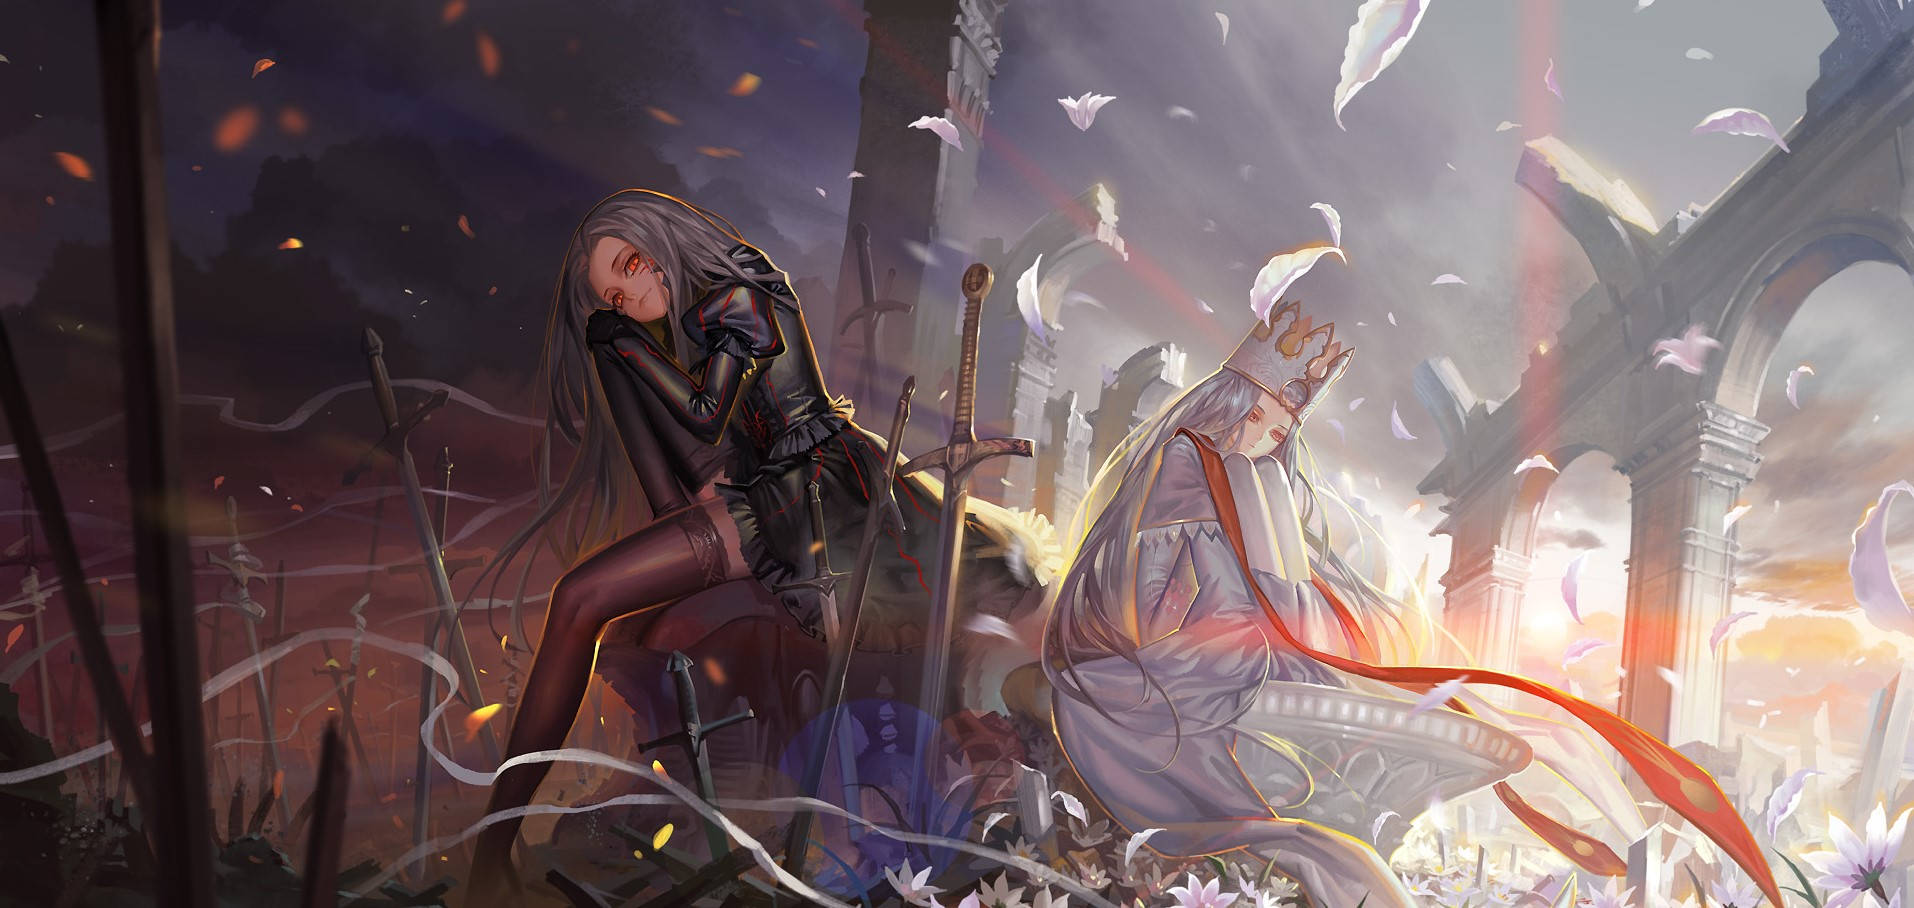 "A dark, yet mystical world": Journey into the world of Fate Series Wallpaper